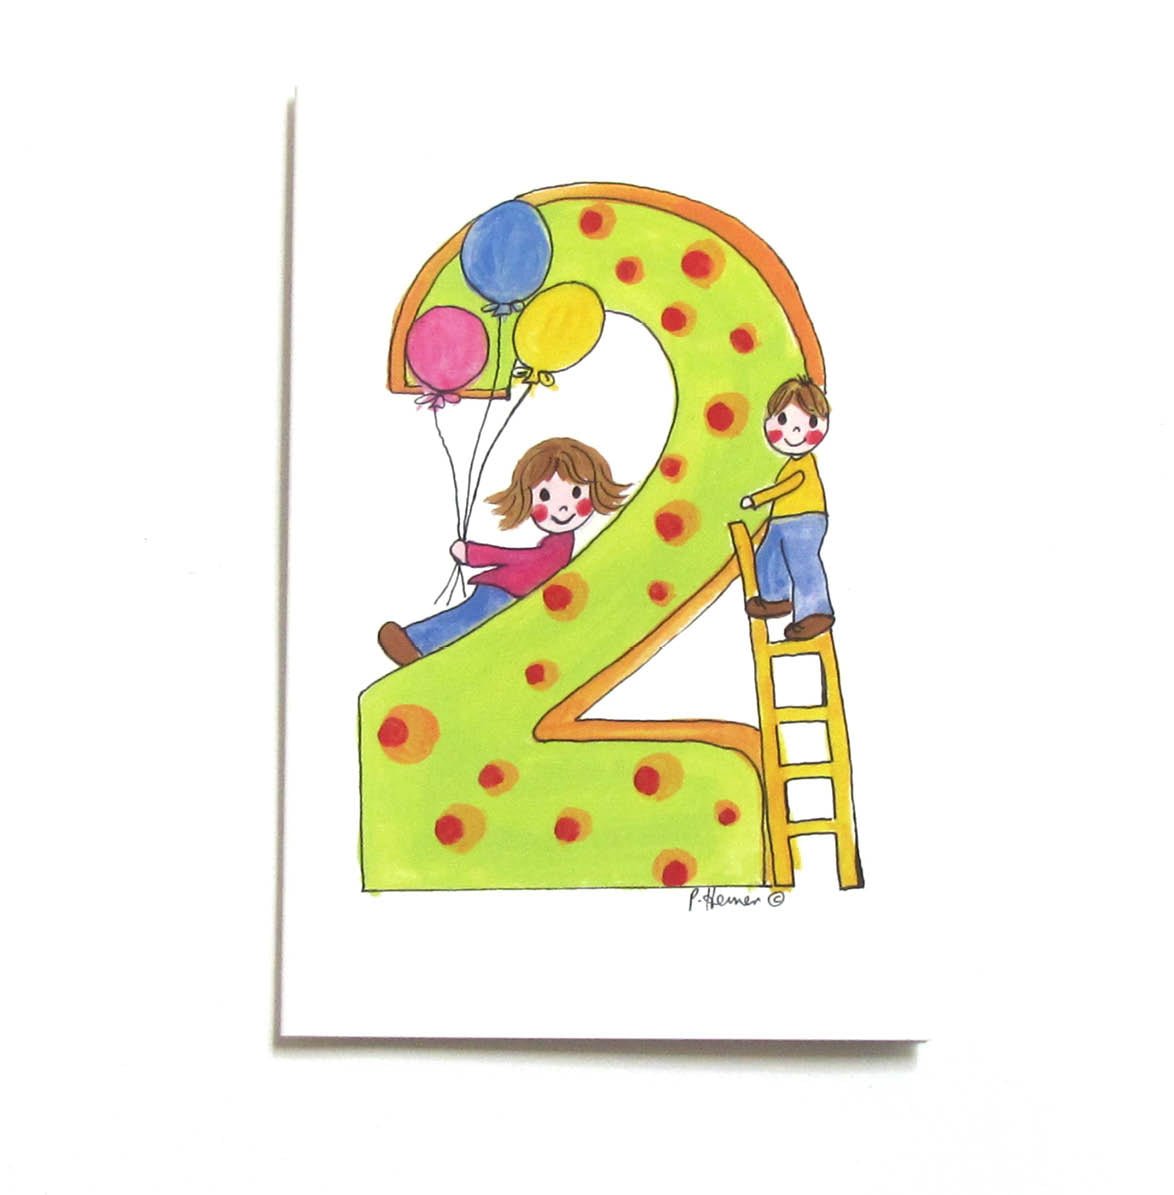 Aged 2 Children with Balloons Card